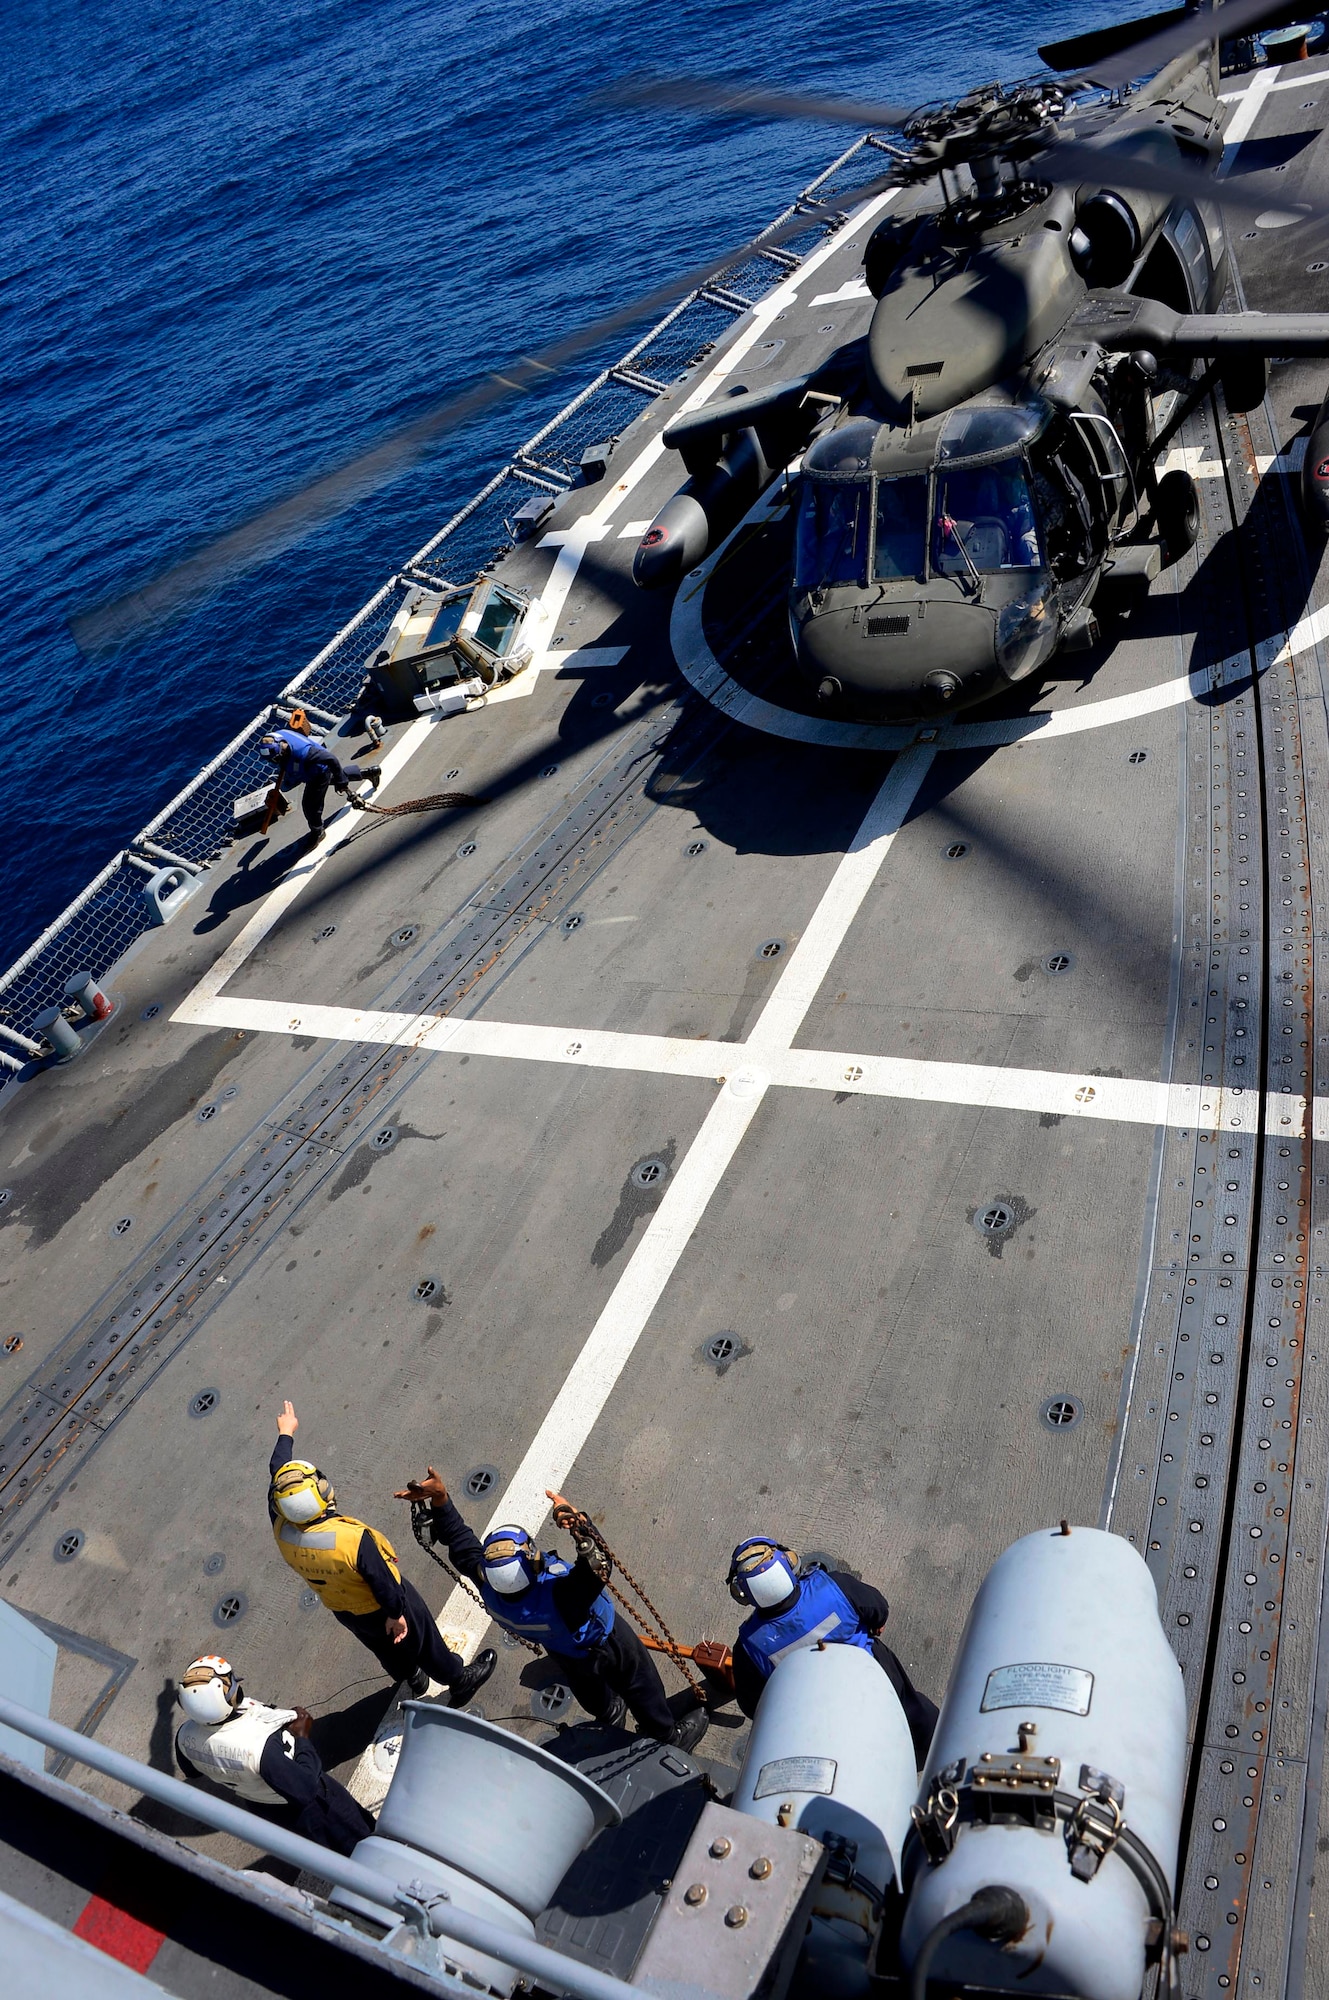 A U.S. Navy aircraft handling officer, assigned to the USS Kauffman, signals to the pilot of a UH-60 Blackhawk helicopter, assigned to the 1st Battalion, 228th Aviation Regiment, that the chalks and ties have be removed and the aircraft can take off during deck landing qualifications off the coast of Honduras, Feb. 1, 2015.  The 1-228th Avn. Reg. aircrew participated in deck landing qualifications on board the Kauffman to qualify pilots and crew chiefs on shipboard operations.  Kauffman is on its final scheduled deployment to the U.S. Southern Command area of responsibility supporting multinational, counter-narcotics operation known as Operation Martillo. (U.S. Air Force photo/Tech. Sgt. Heather Redman)